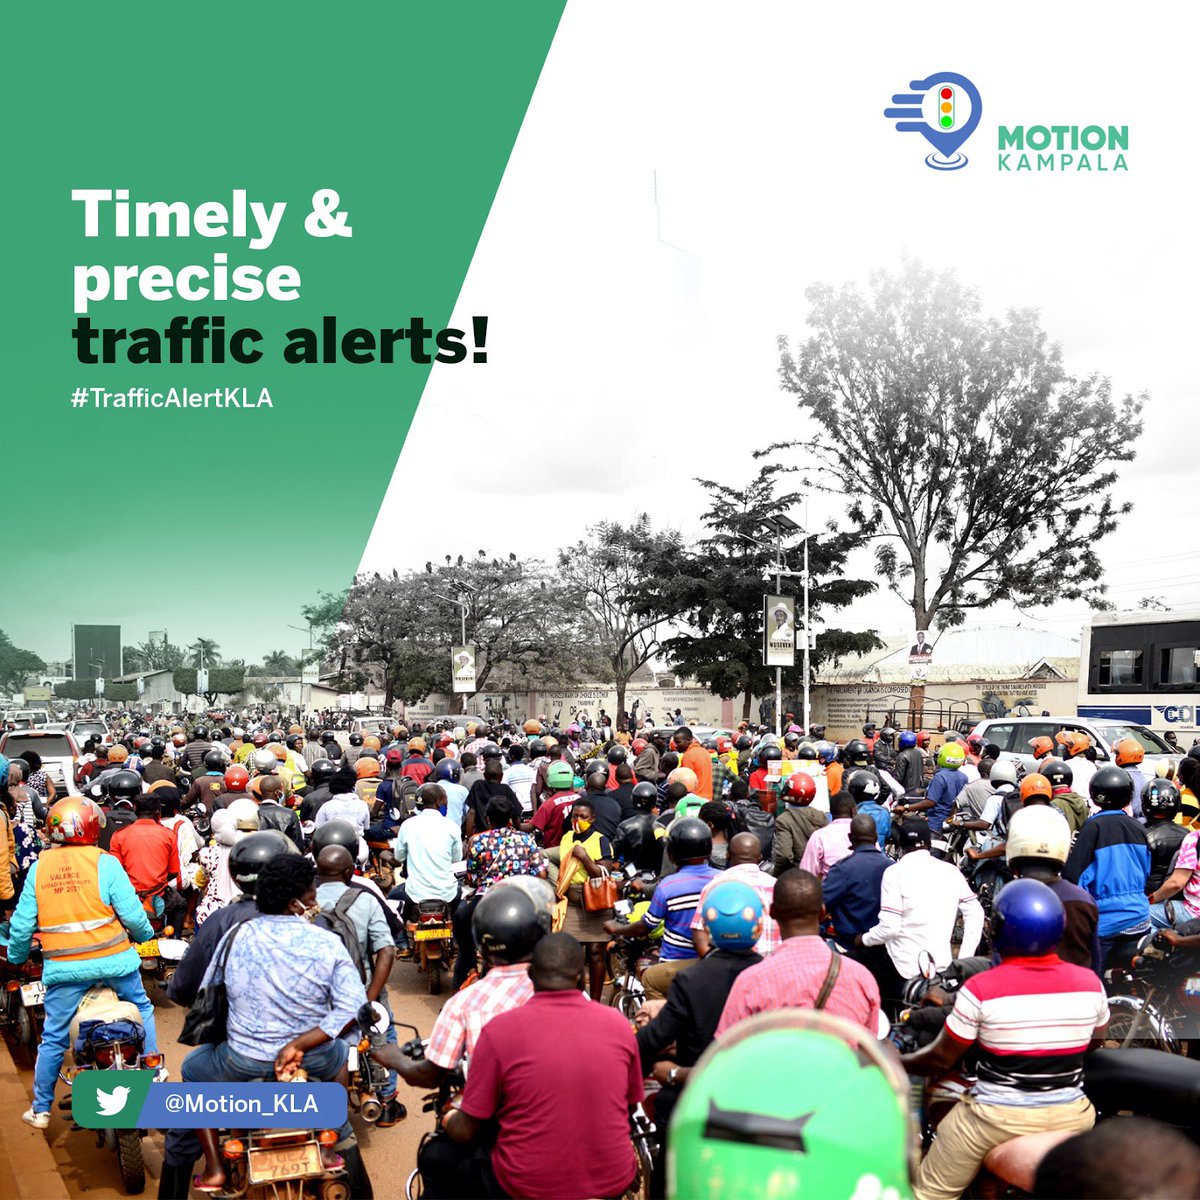 Sharing is caring when it comes to traffic alerts.
Share with @Motion_KLA  and help us build a connected community for safer roads! 
#TrafficAlertKLA #ShareAlertsWithUs